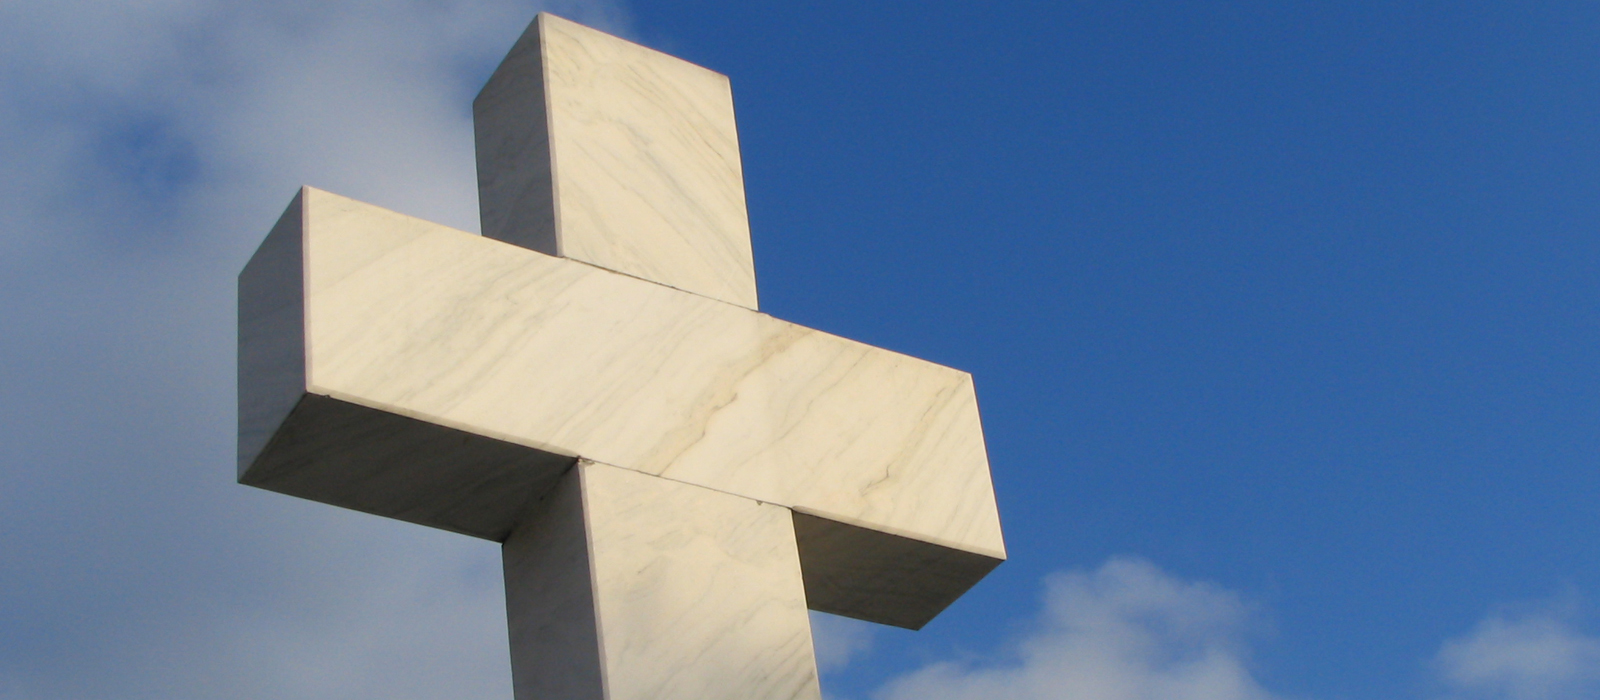 Large cross monument/statue erected outside.